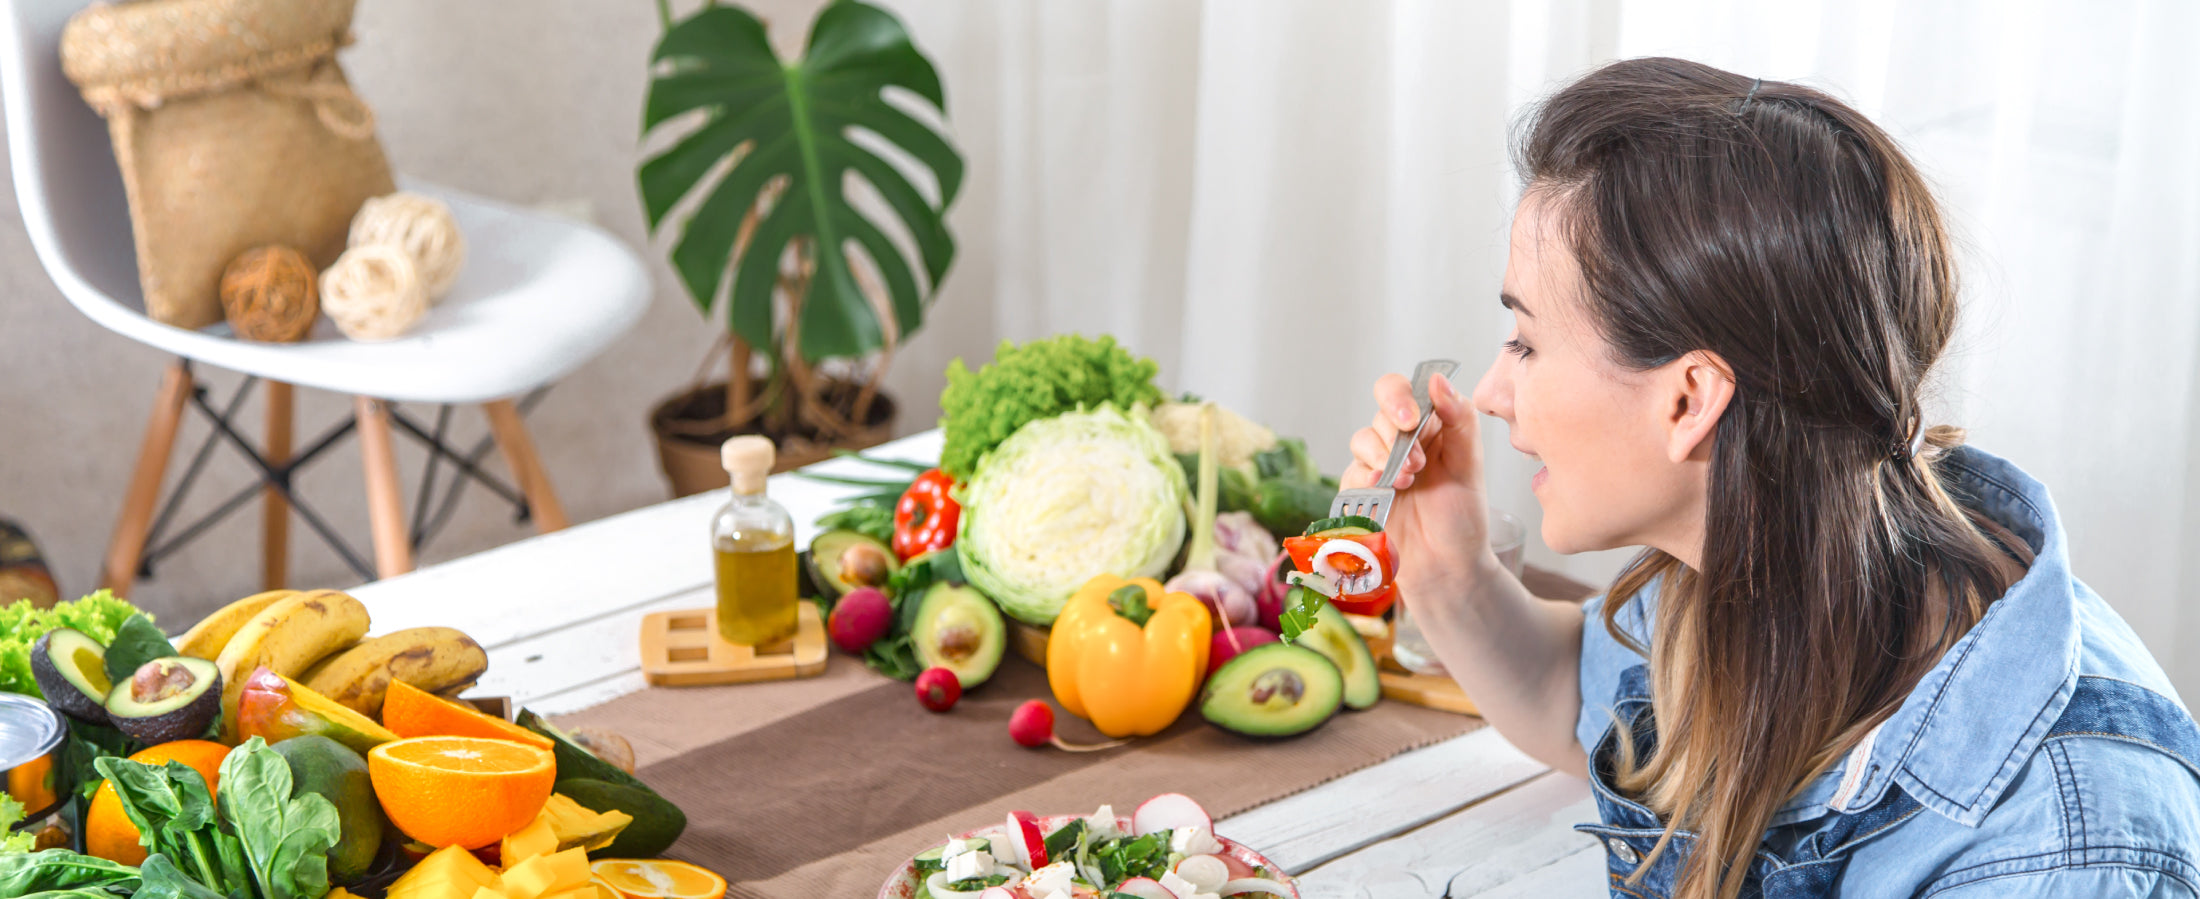 image of a woman eating salad next to a table full of fruits and veggies